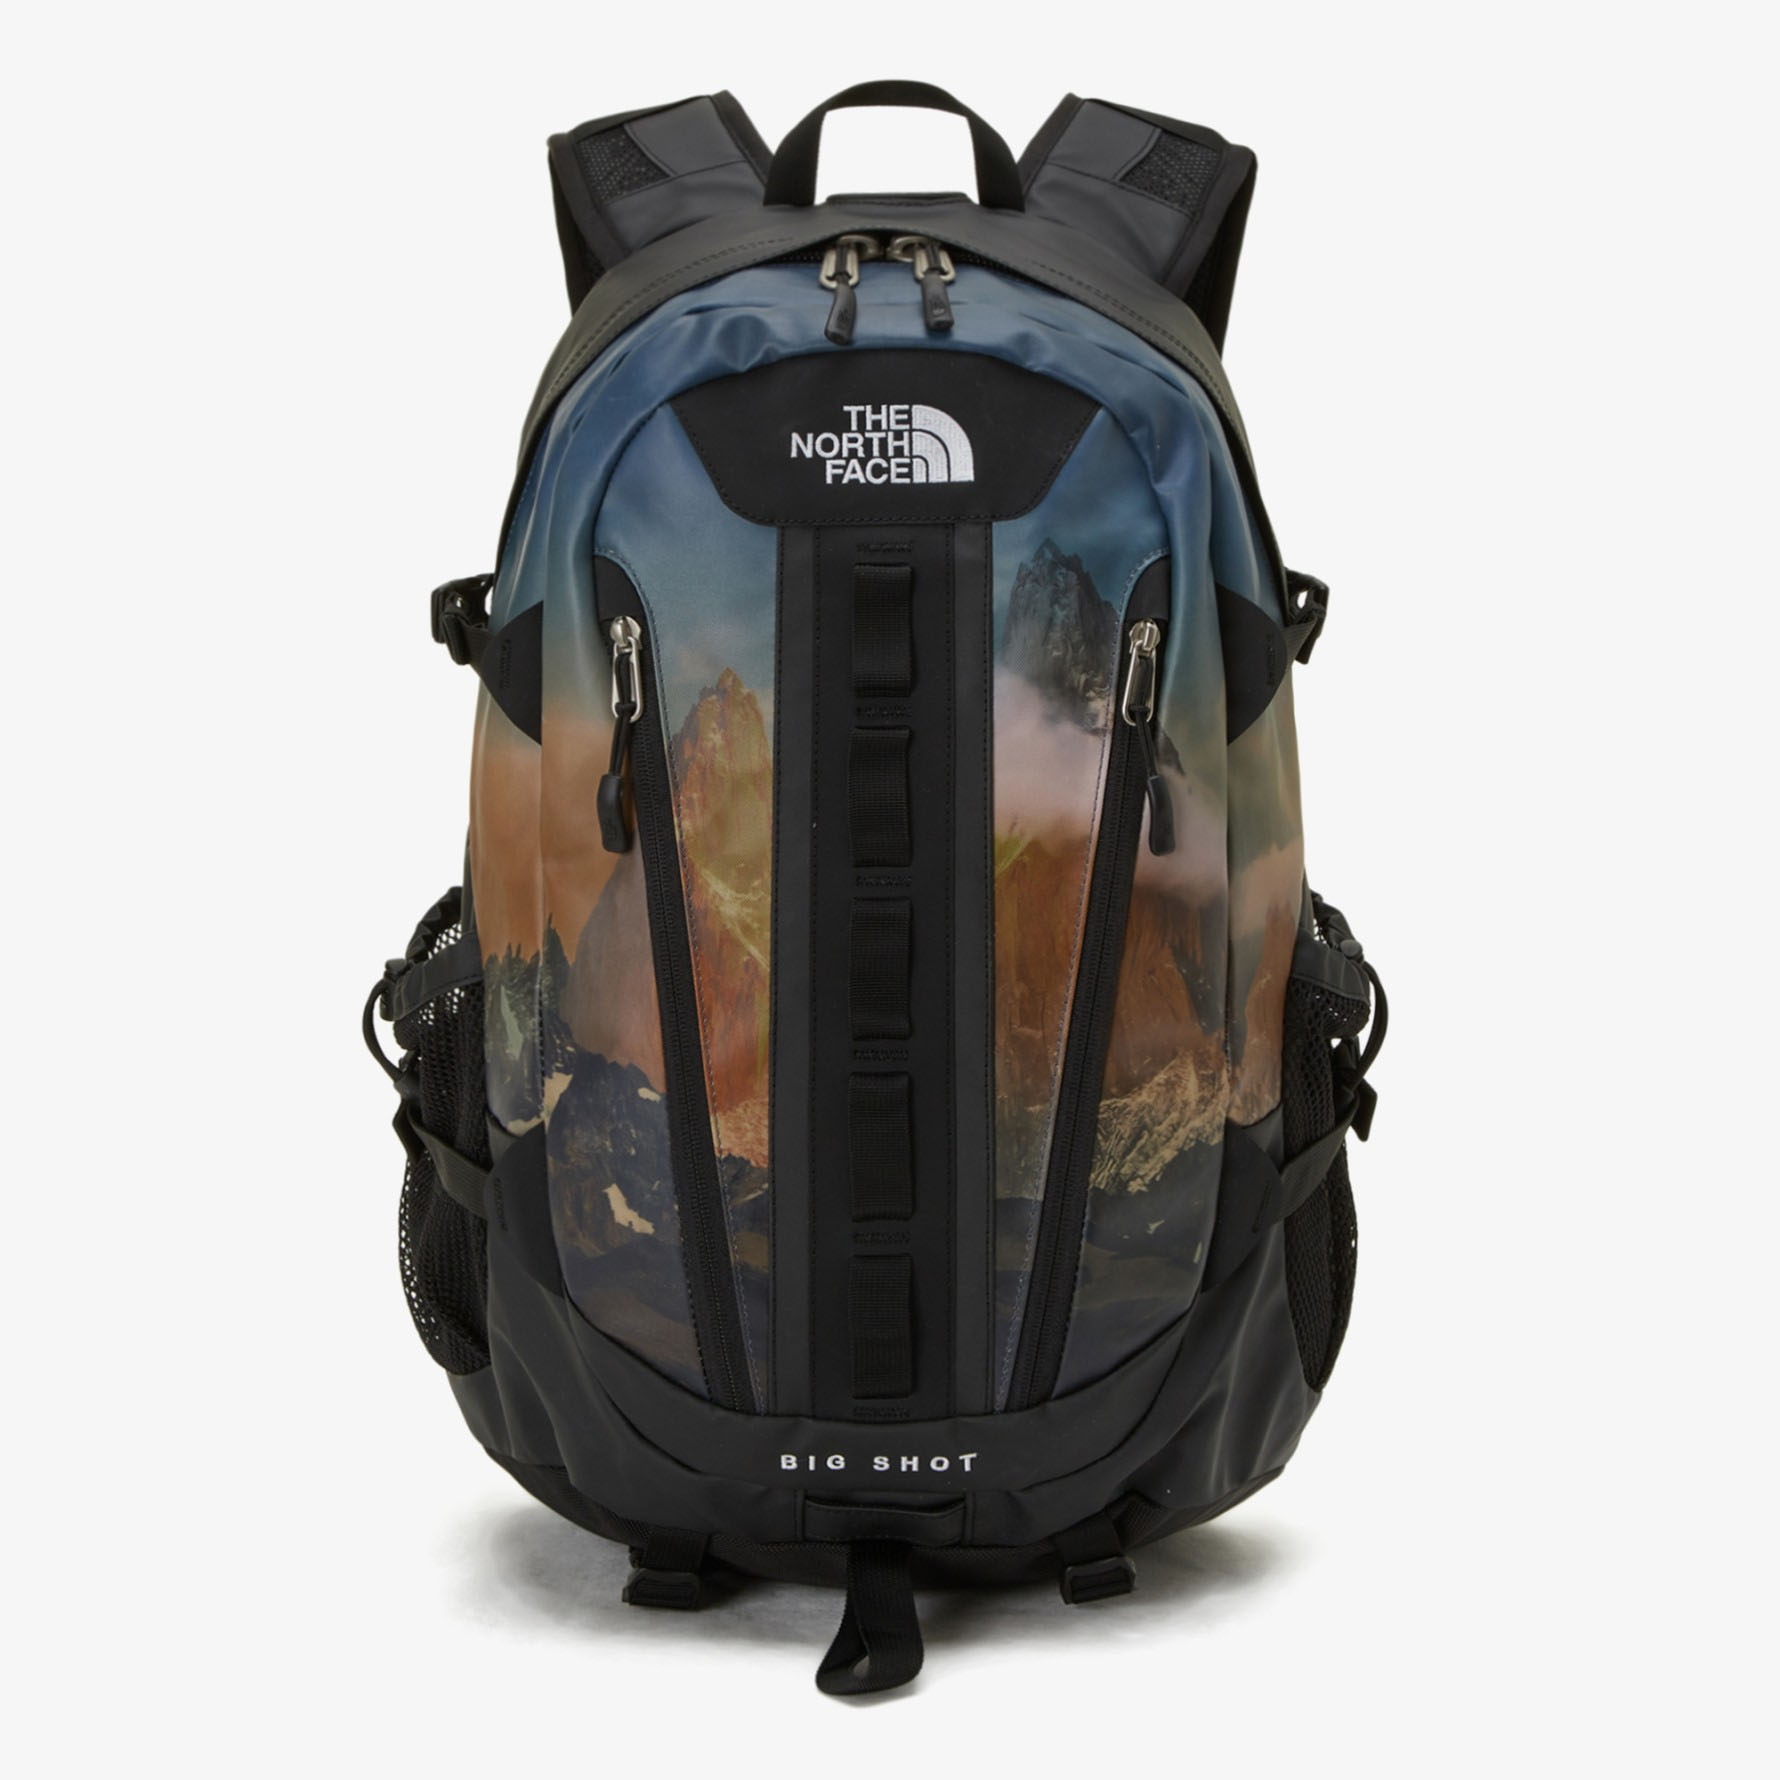 THE NORTH FACE バックパック BIG SHOT NOVELTY 30L BACKPAC...